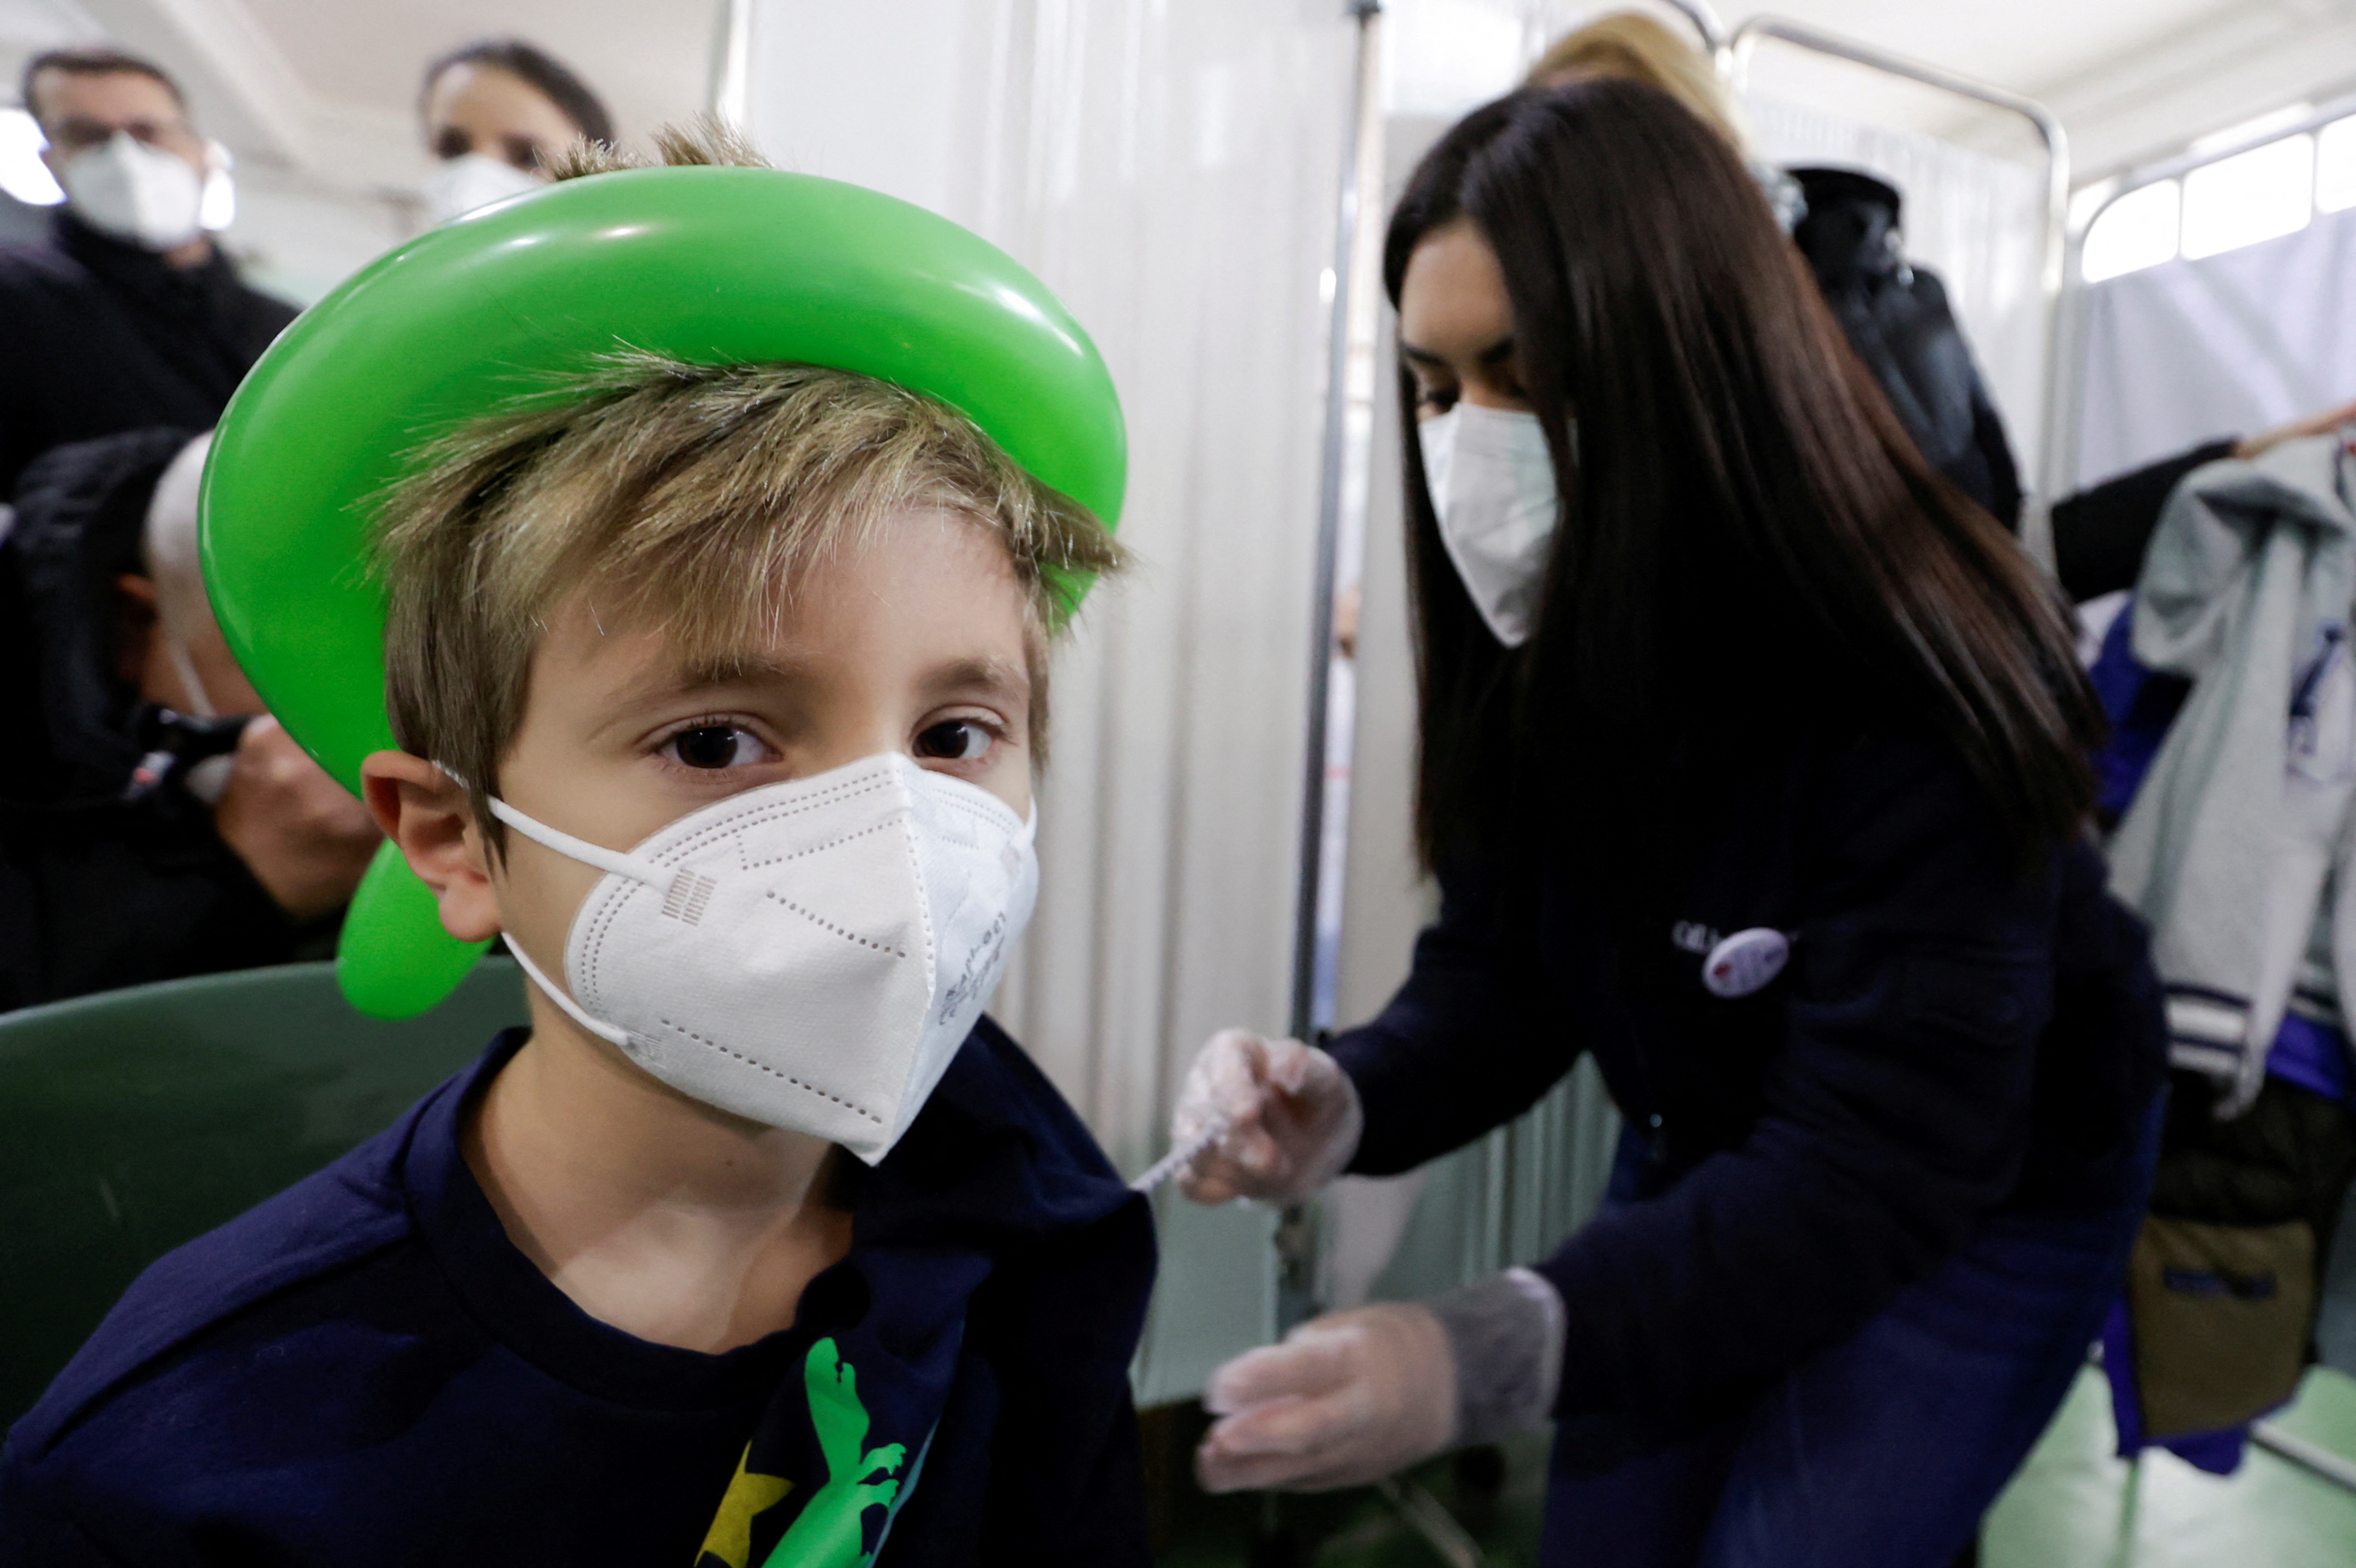 Pupils receive COVID-19 vaccination in Naples